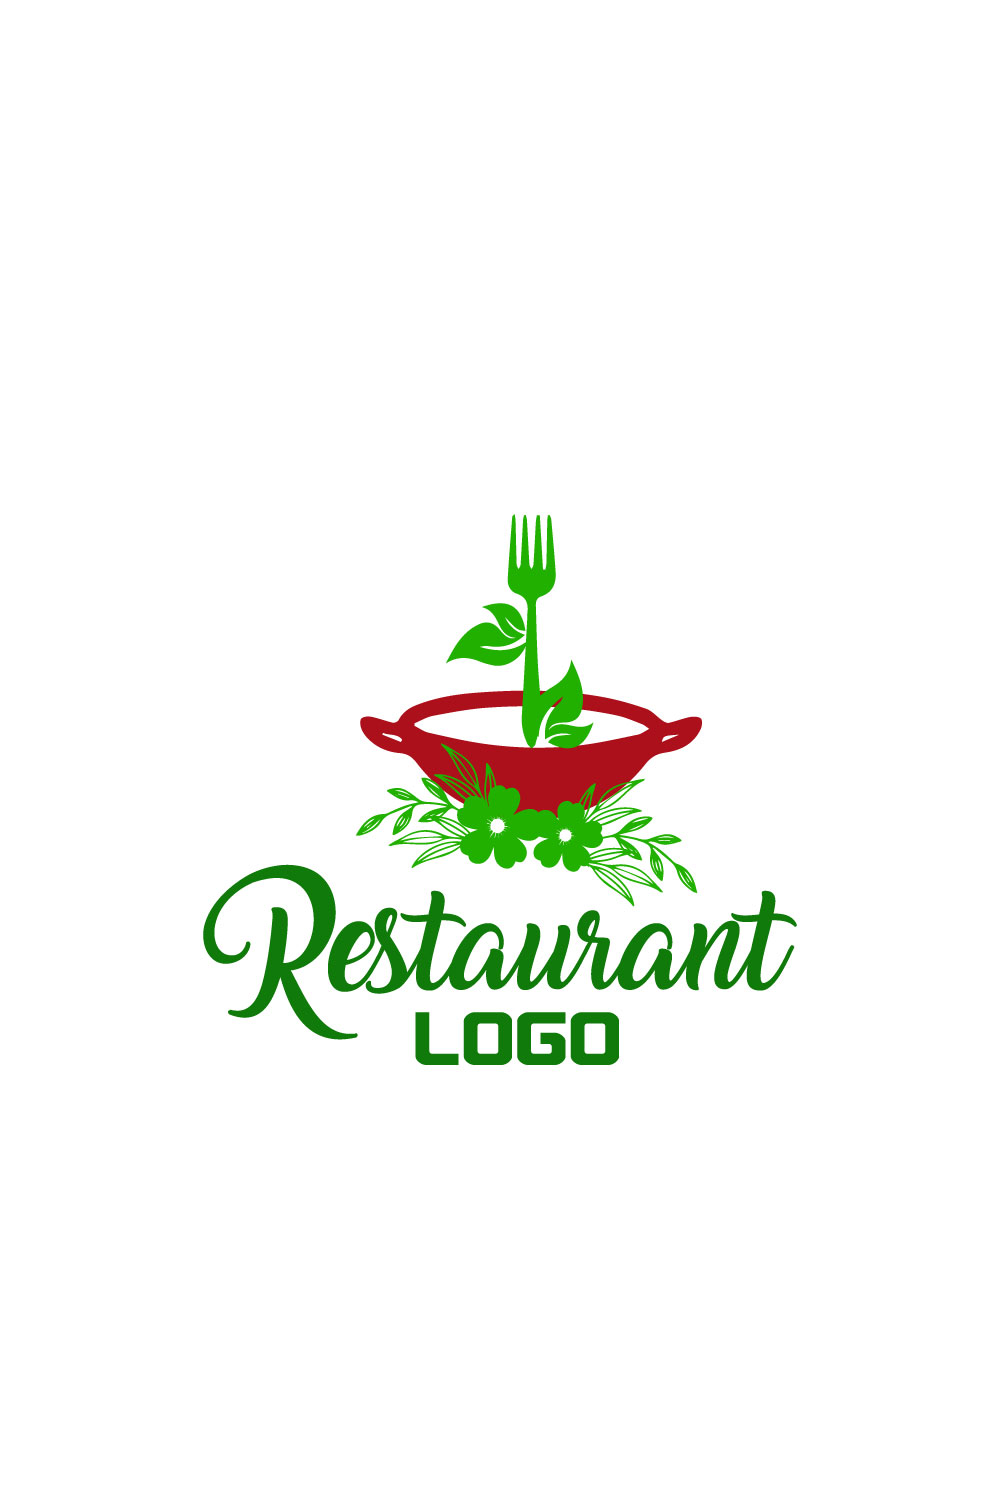 Free Gourmet Goodness logo pinterest preview image.